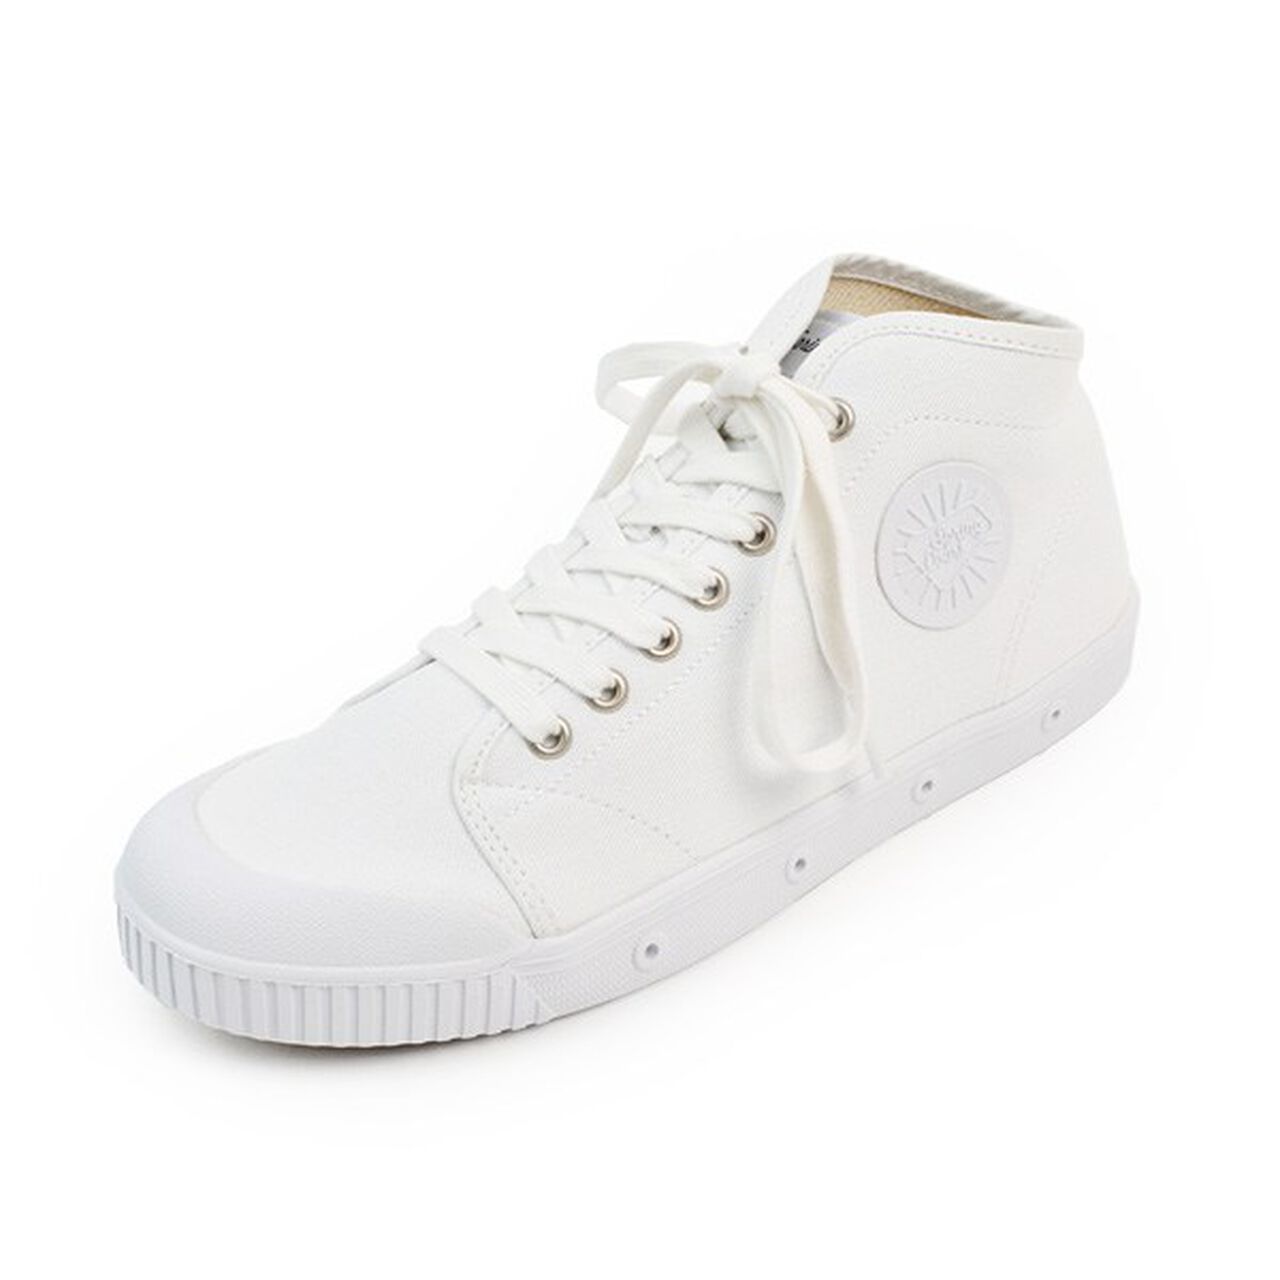 B2 Mid Cut Canvas Sneakers,White, large image number 0